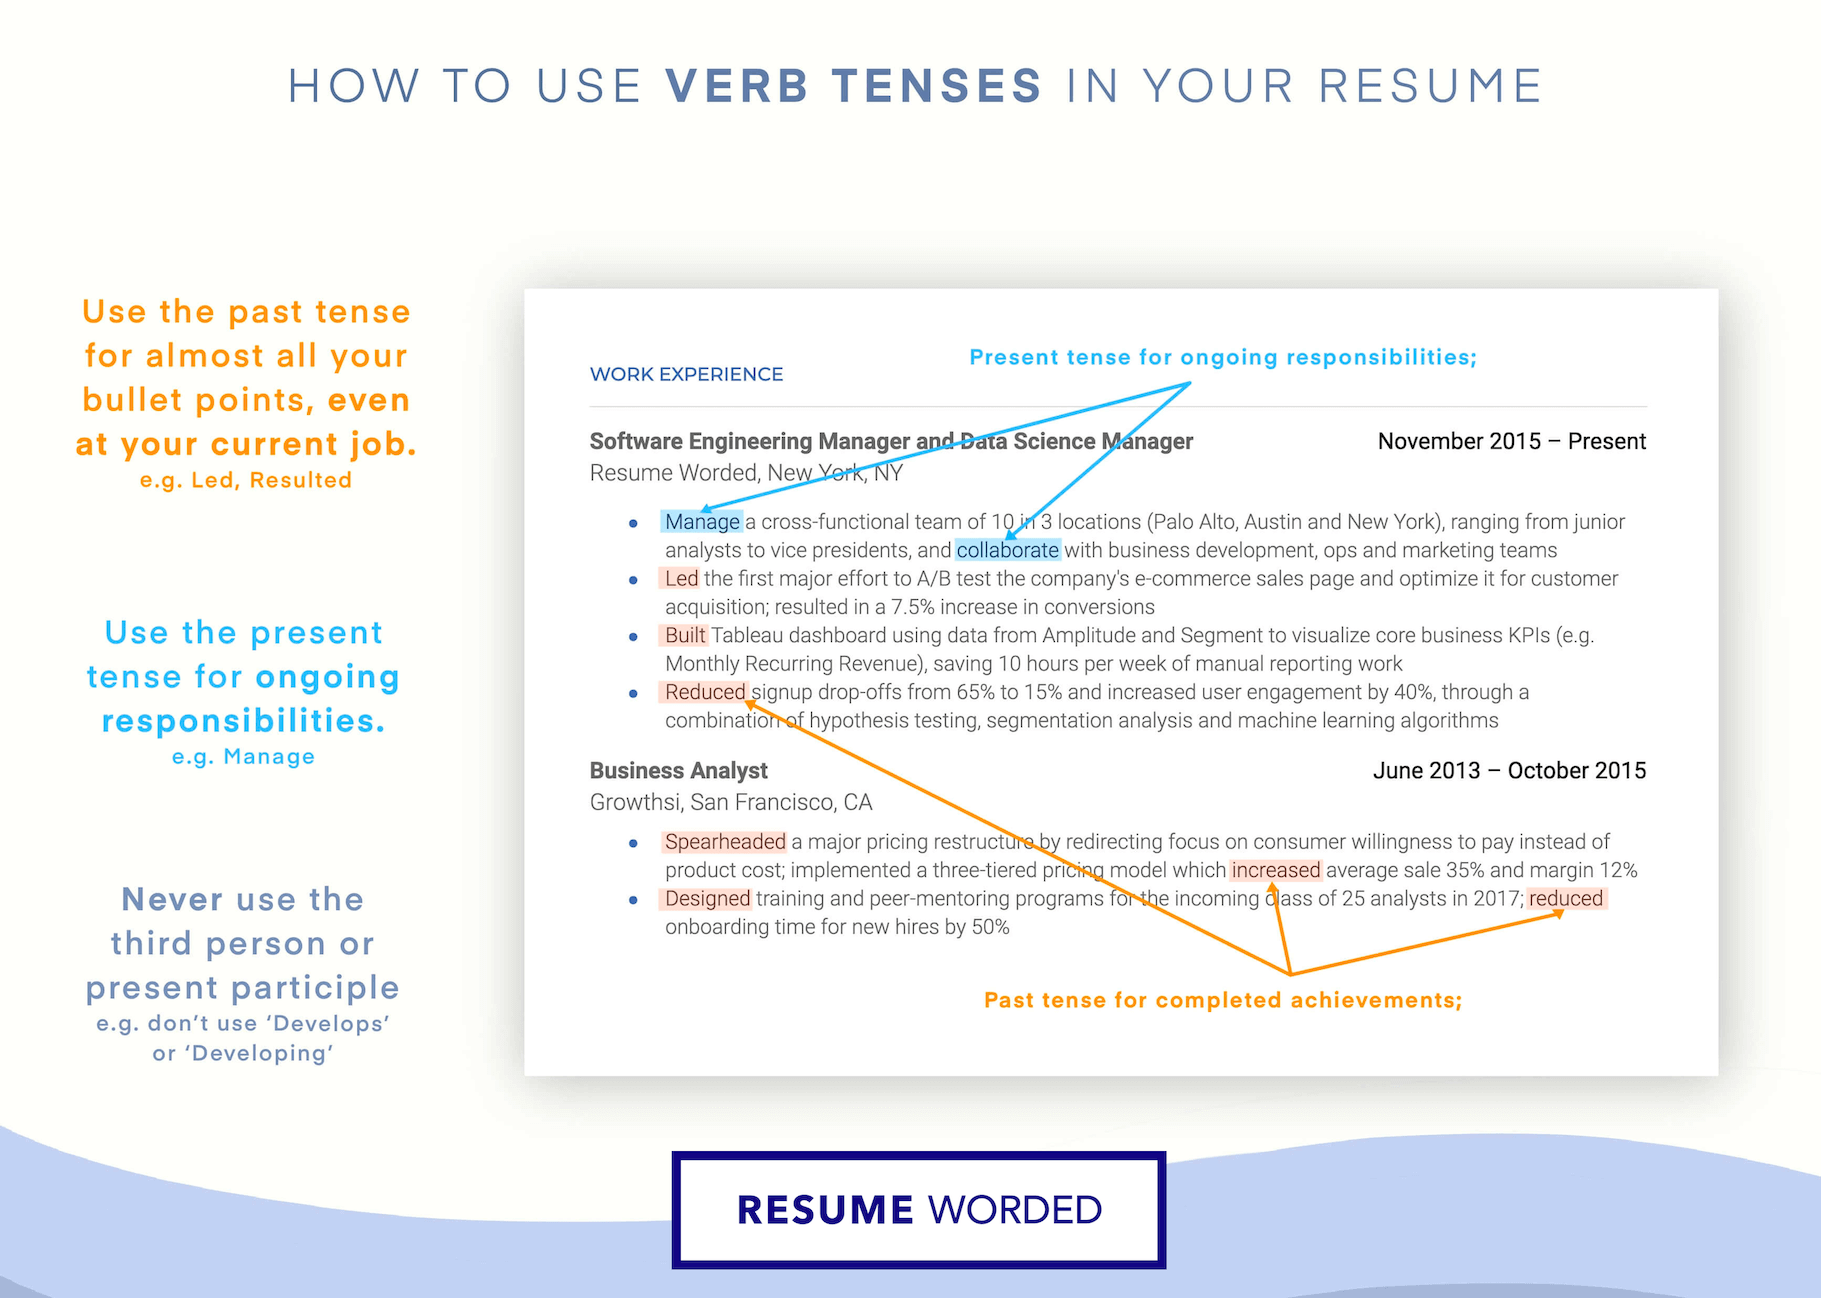 Synonyms for Coordinate To Use on a Resume